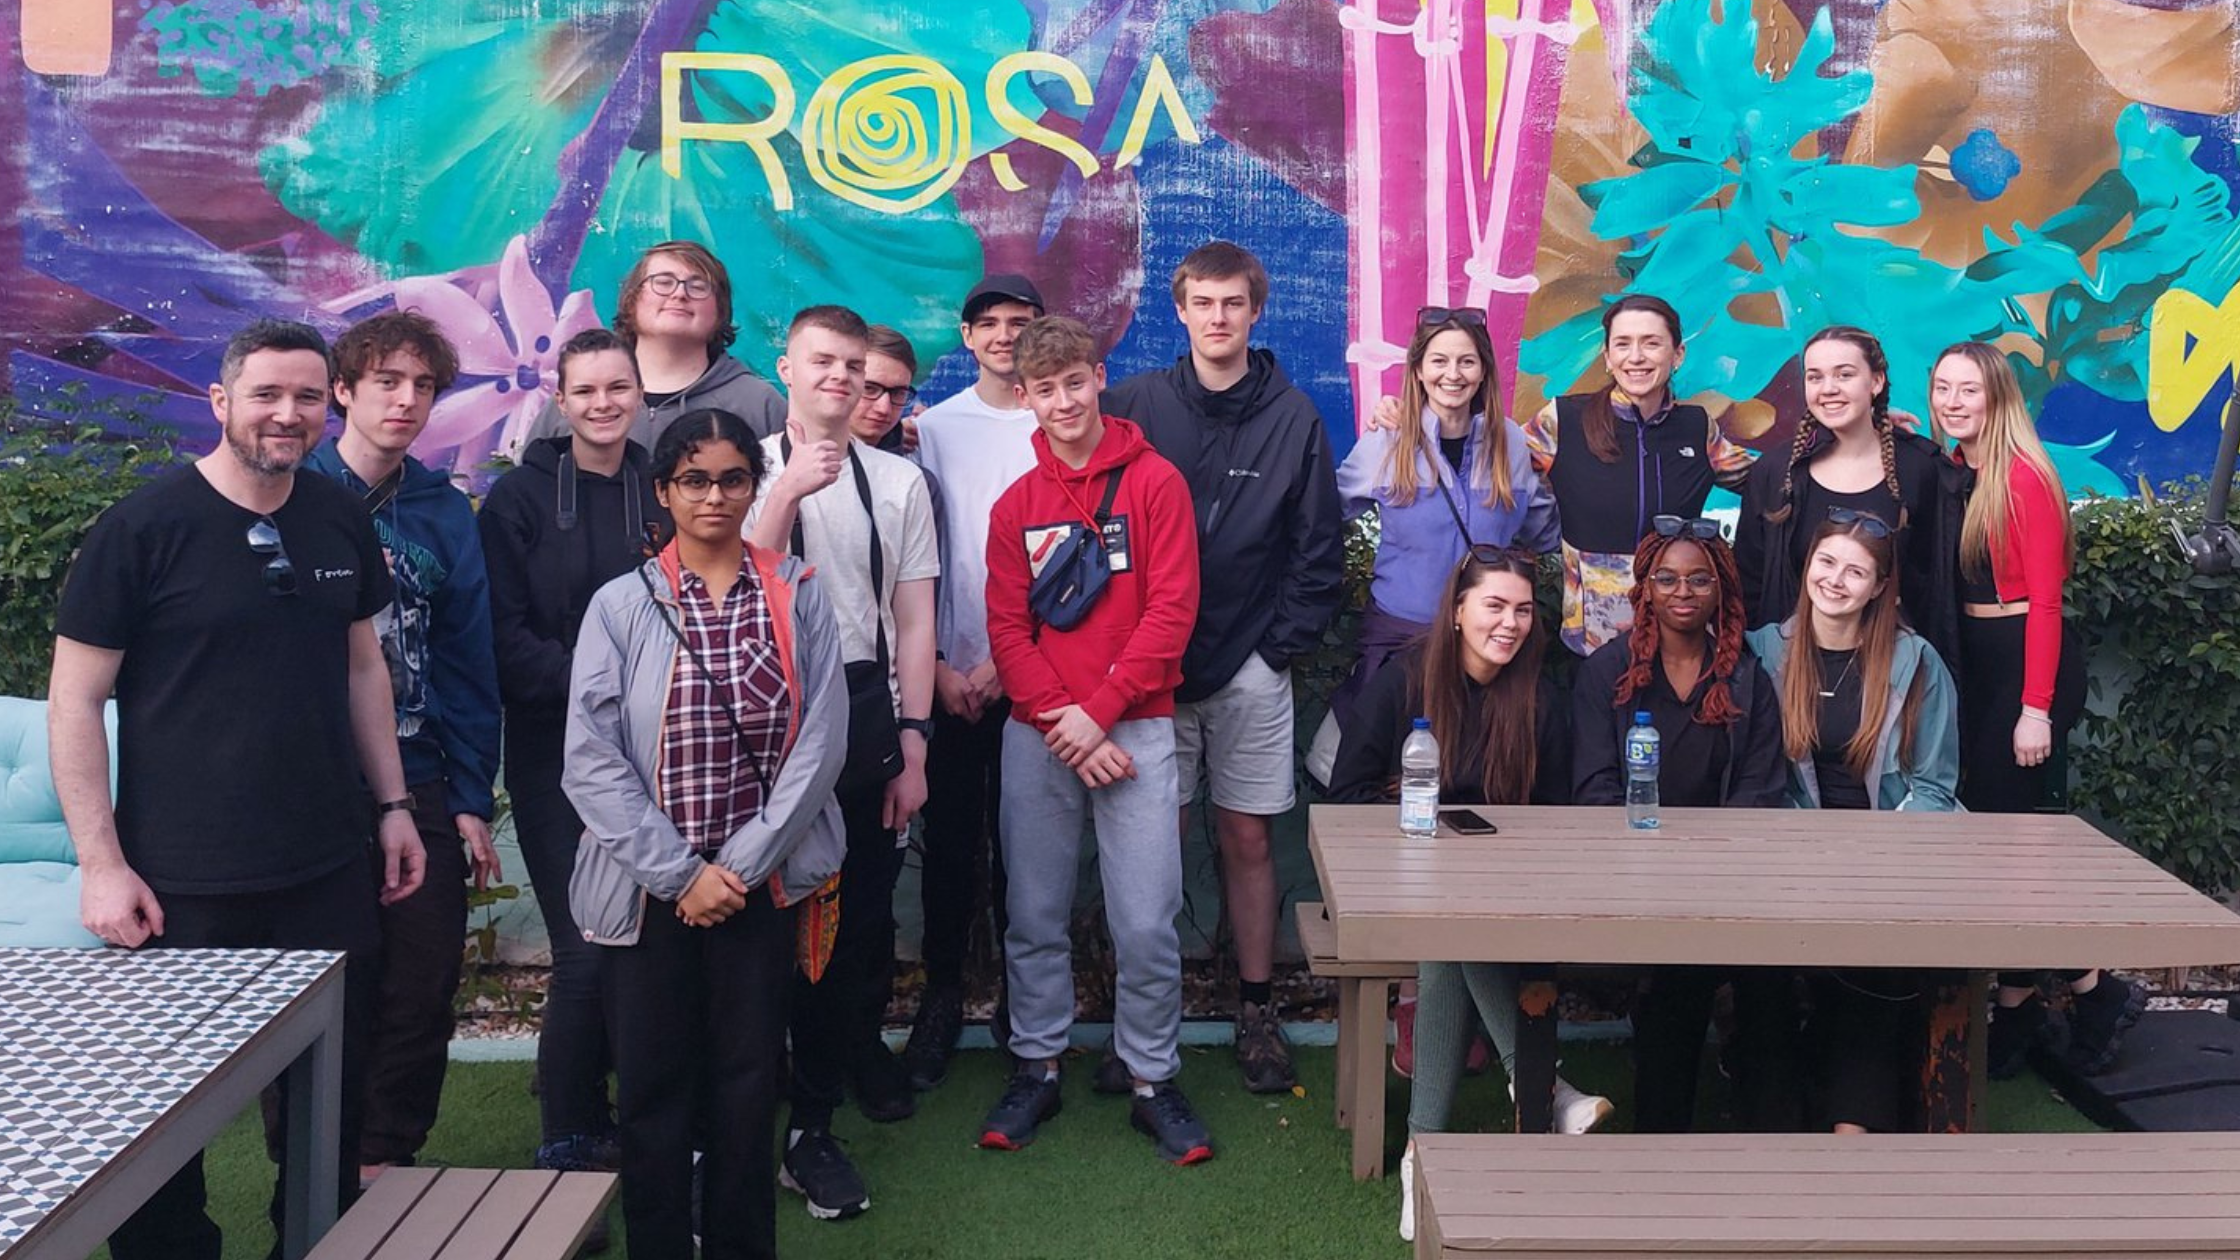 Group of students from Pobalscoil Neasáin posing in front of a vibrant wall with the text "Rosa" on it.